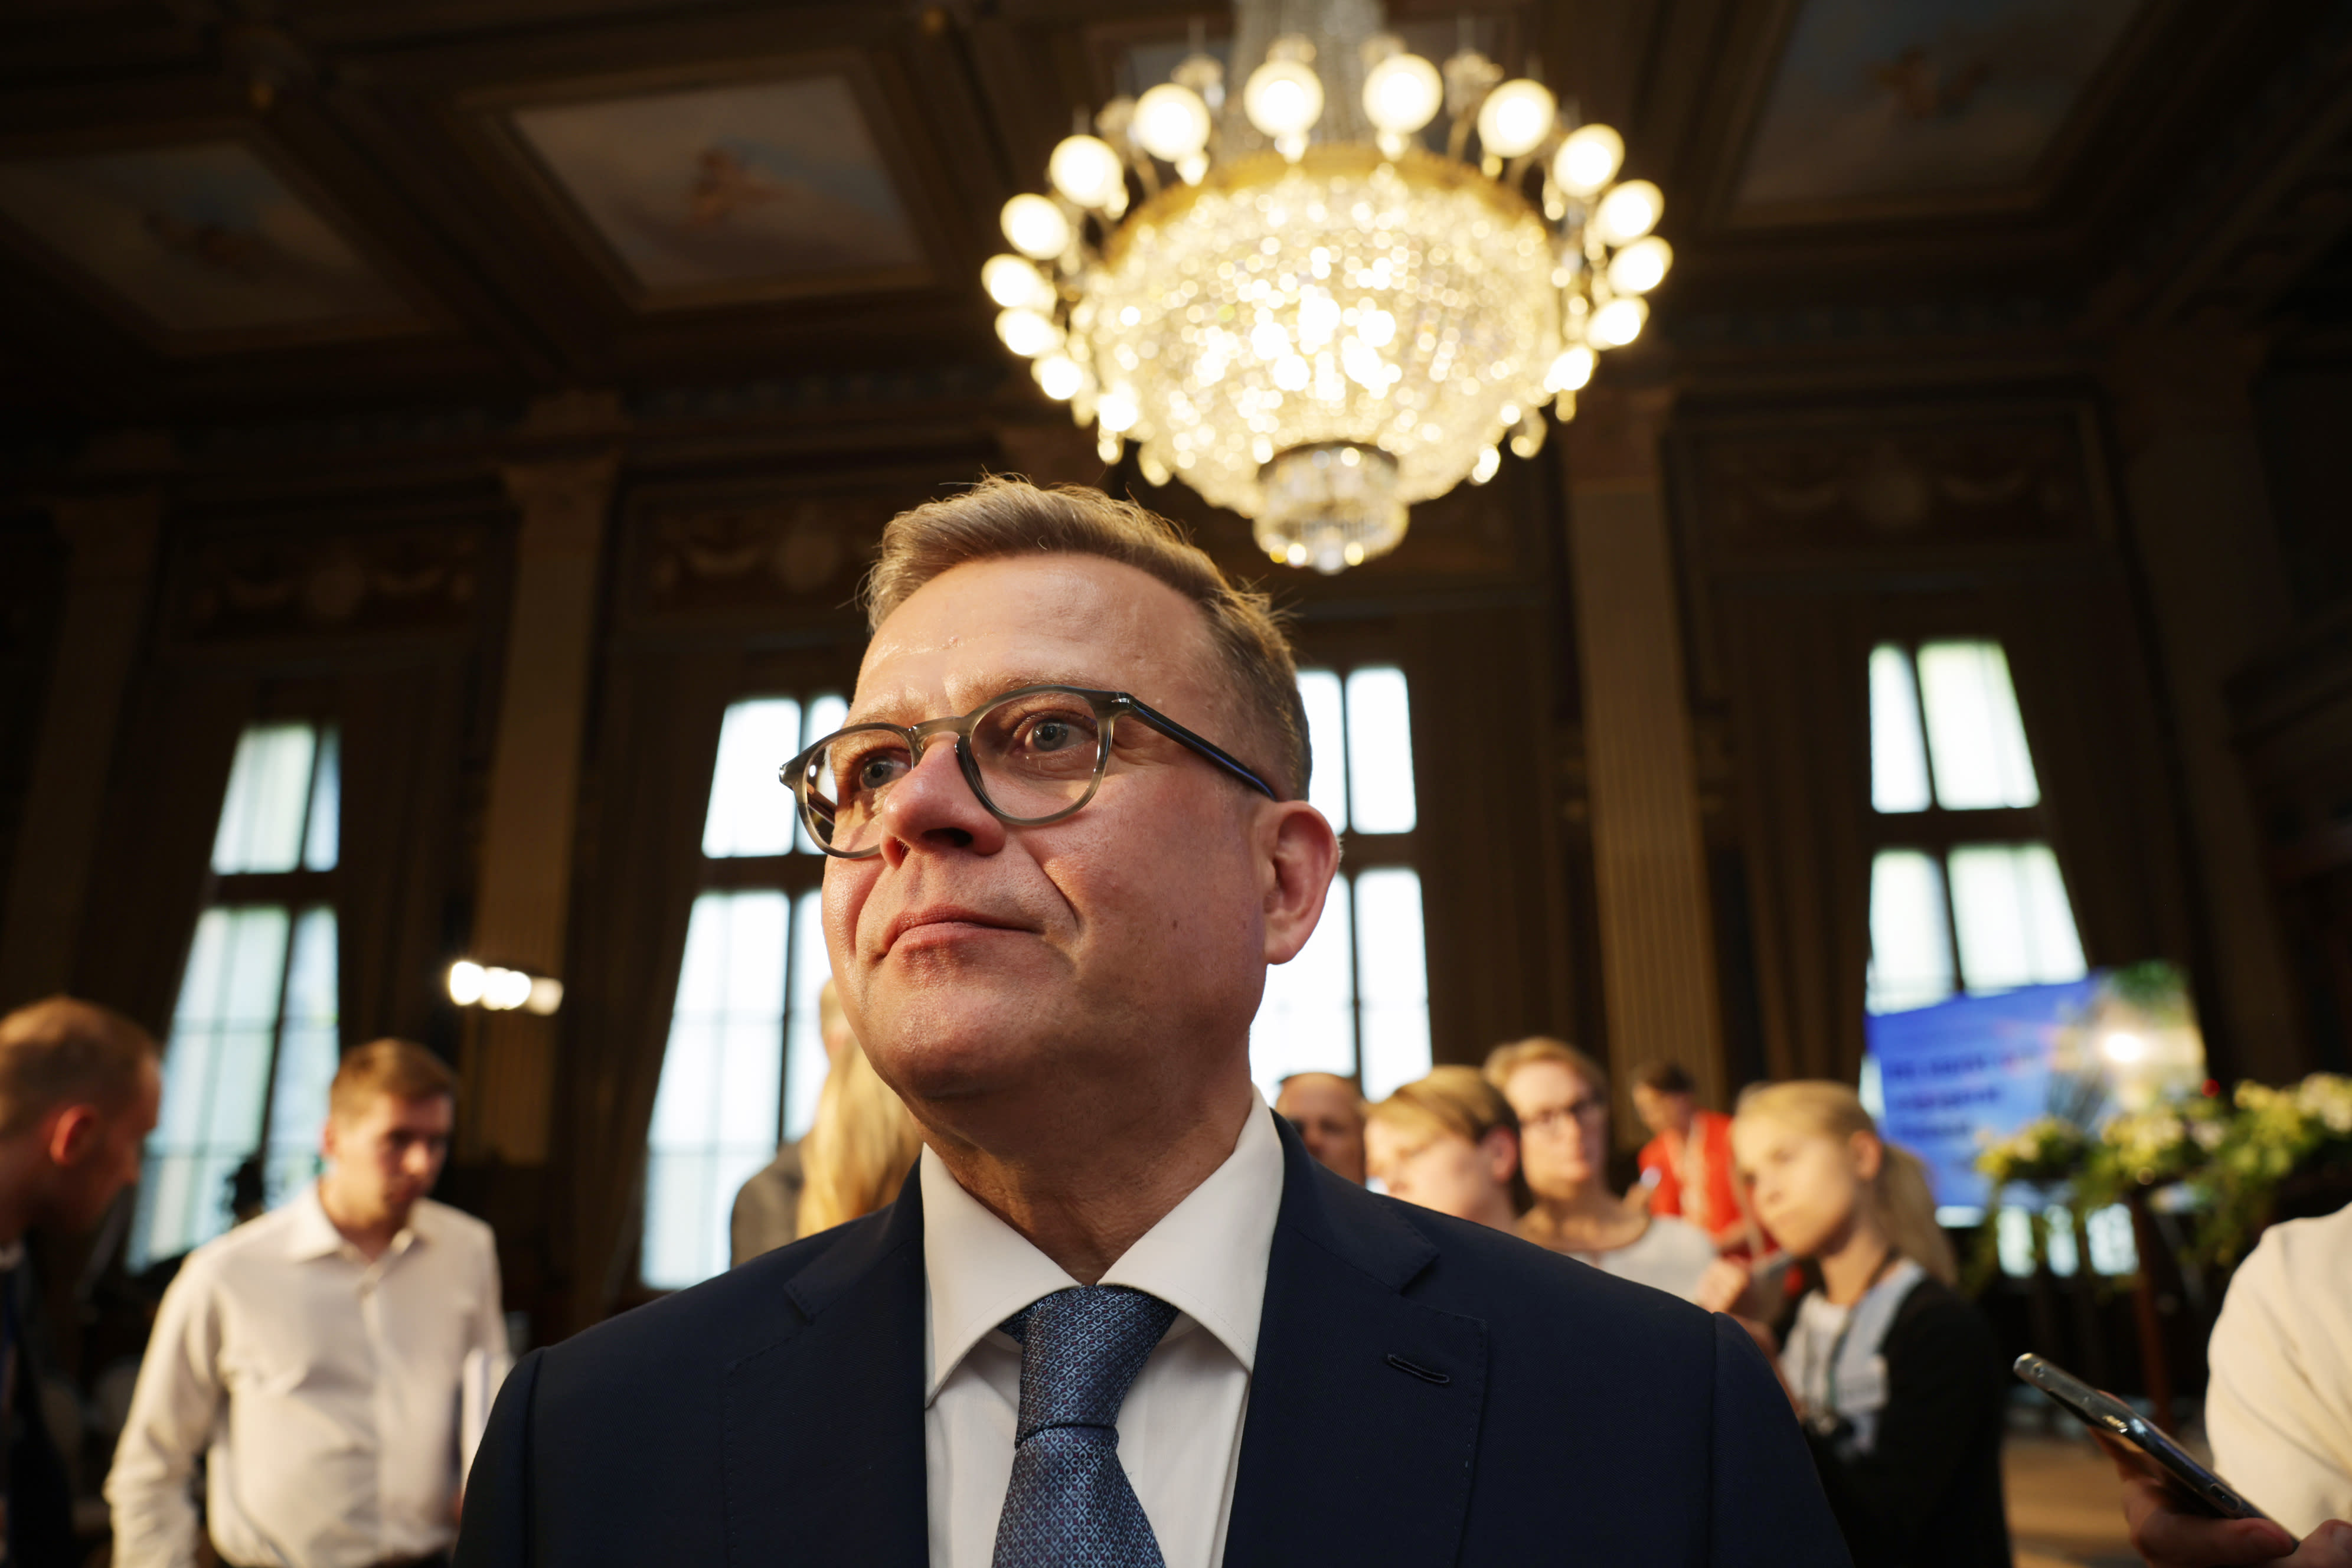 Finland’s plan for the next four years: Eight daily changes